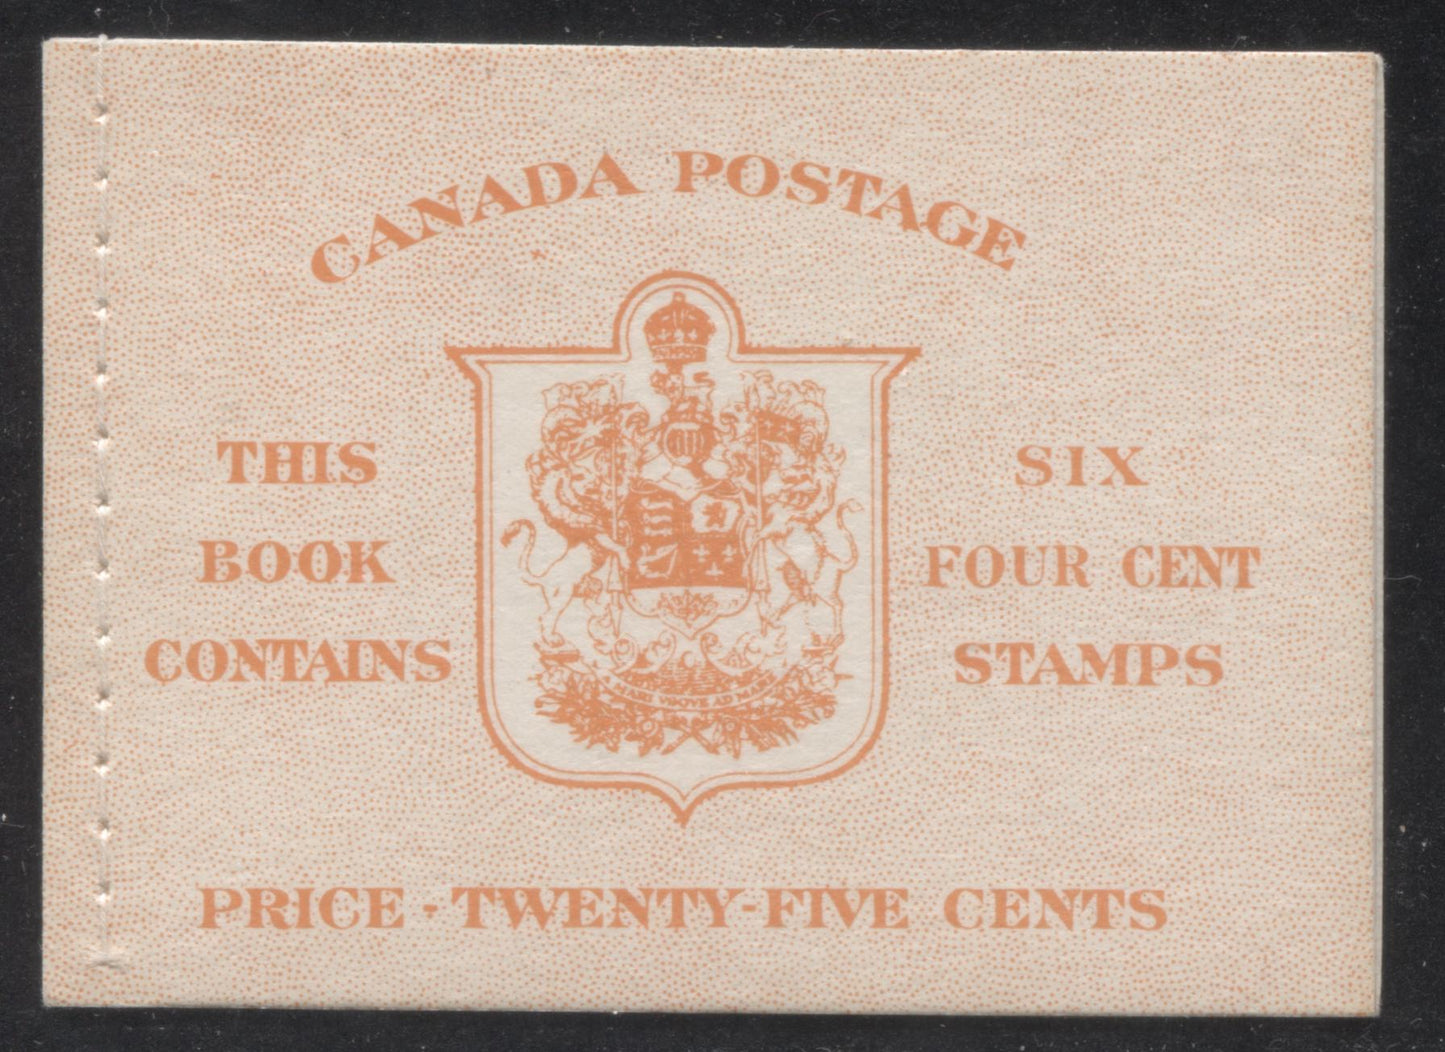 Canada #BK42b 1949-1953 Postes-Postage Issue Complete 25c, English Booklet Containing 1 Pane of 6 of the 4c Orange King George VI Harris Front Cover Type IIi , Back Cover Ei, No Rate Page, Stitched Binding Brixton Chrome 